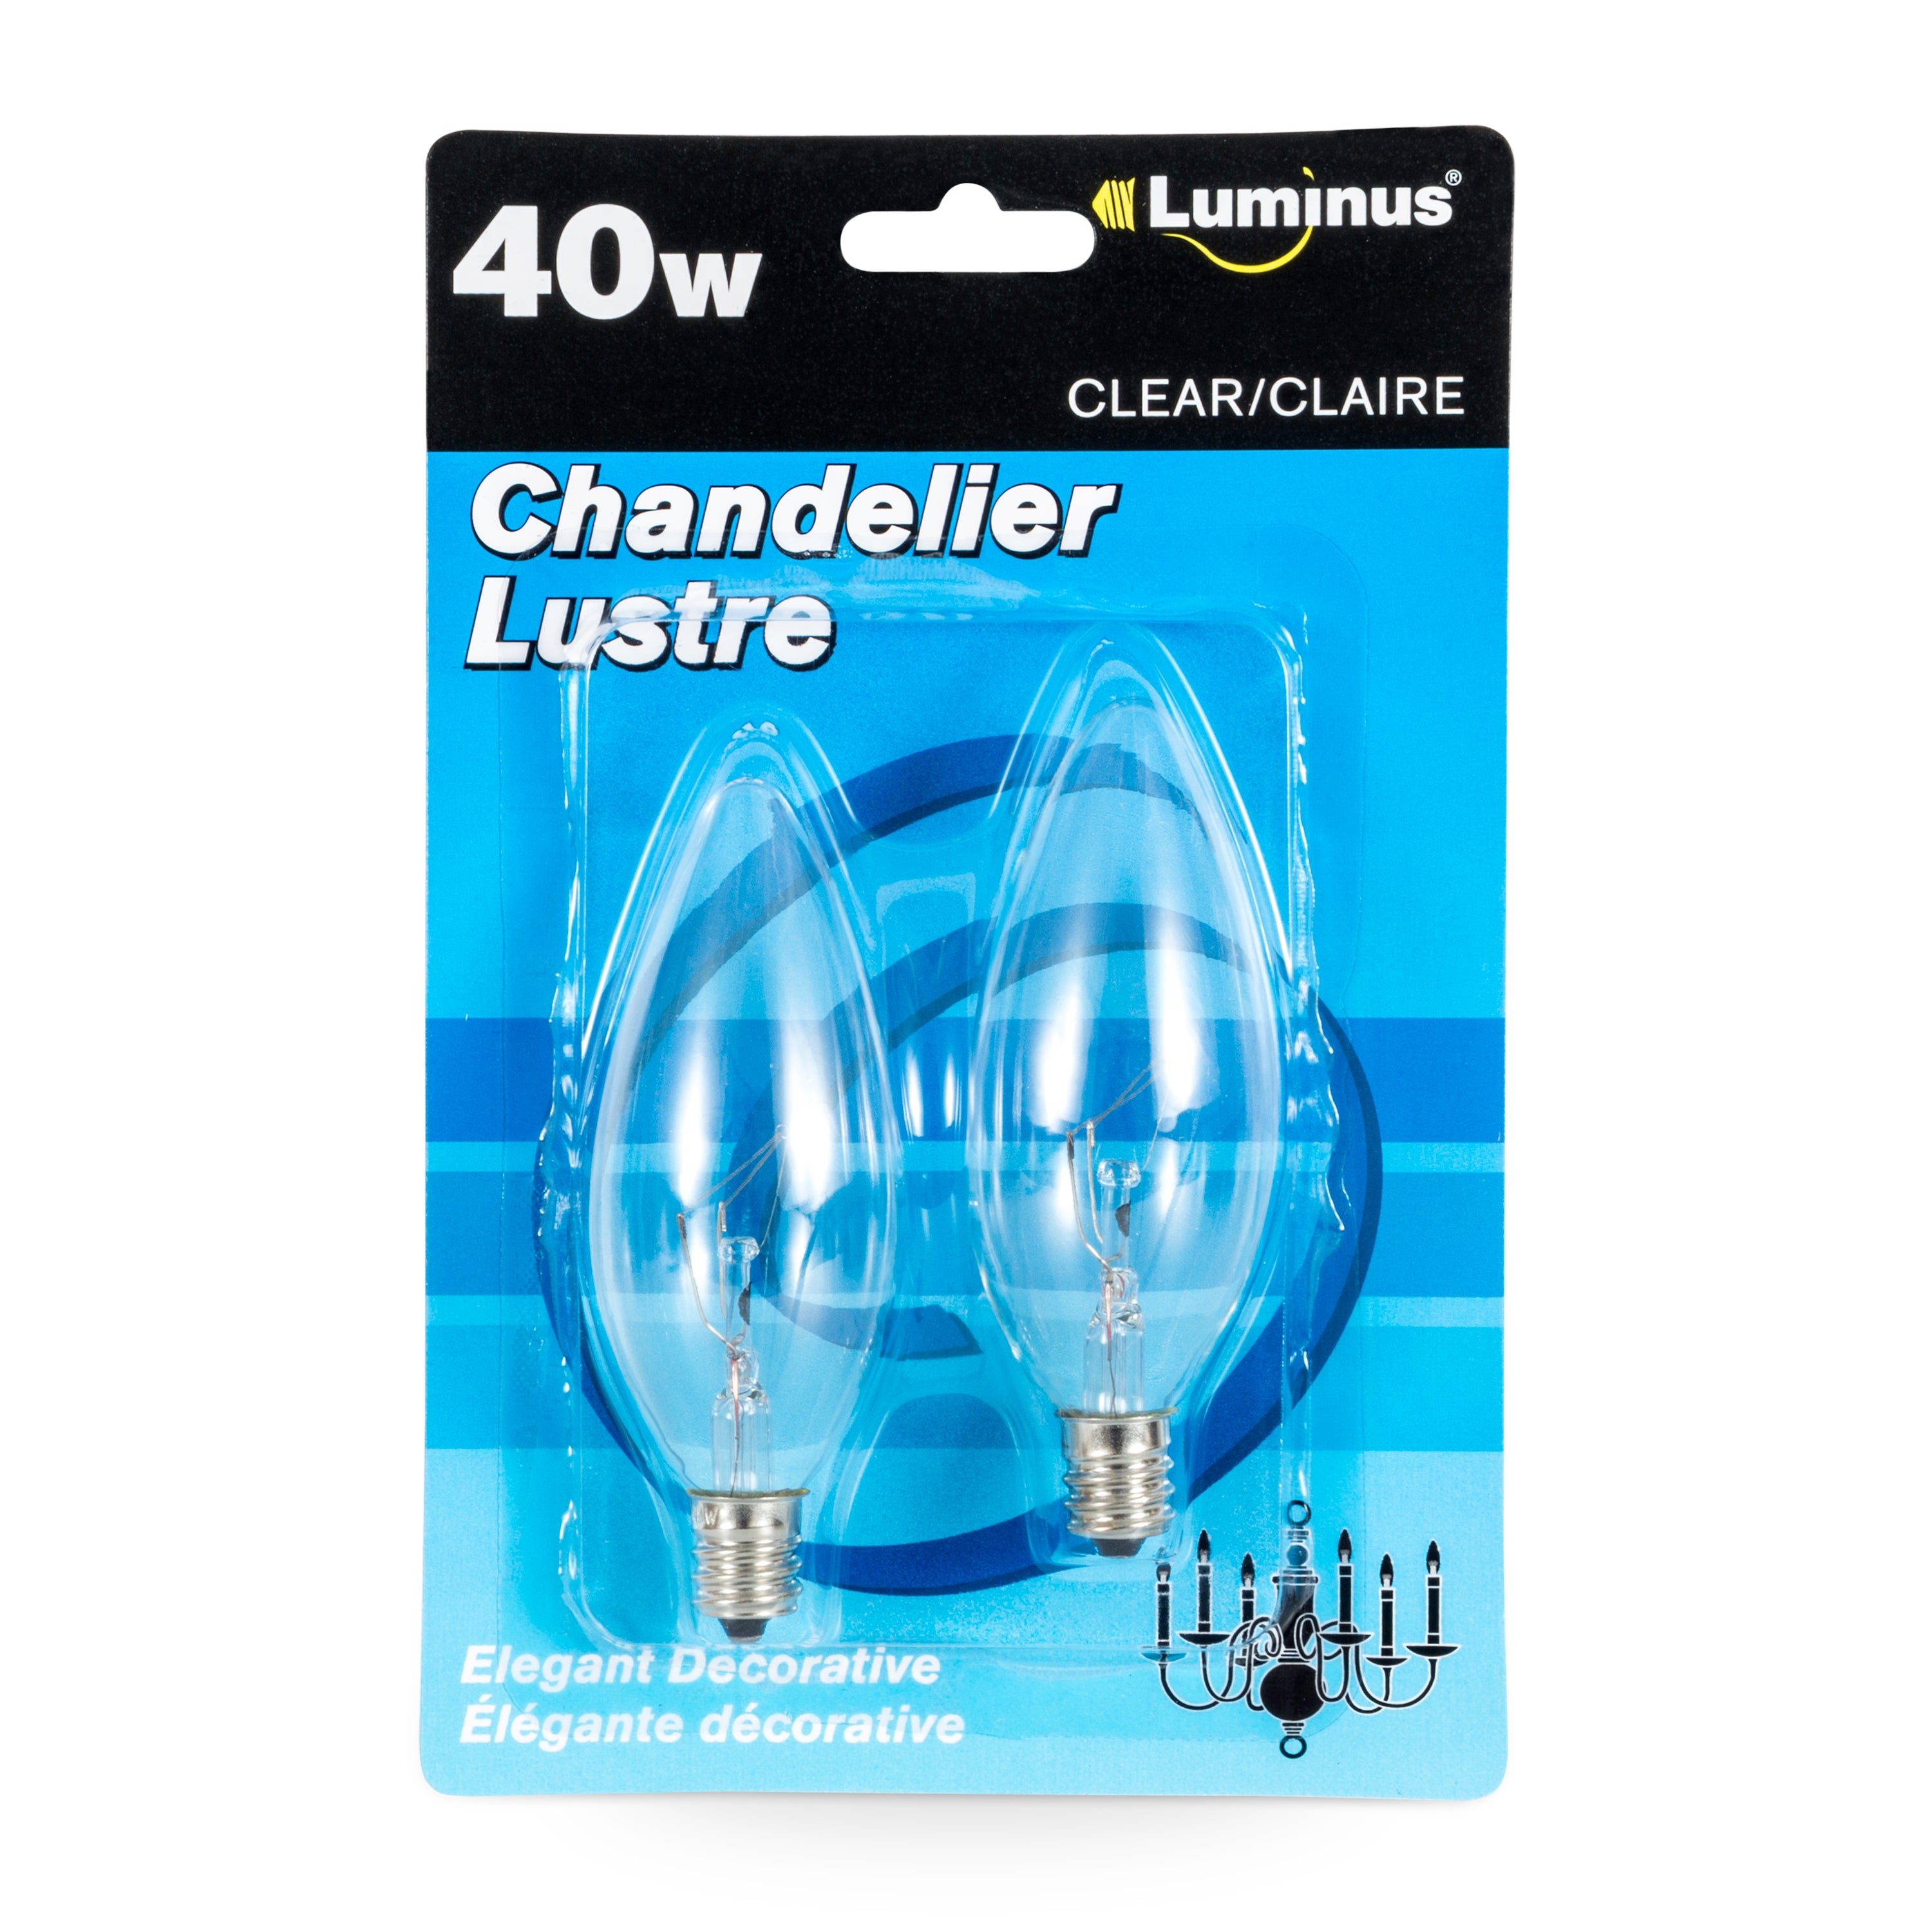 Luminus 40W/Ctc/120V/1500H/Clear Chandelier 2/Pack